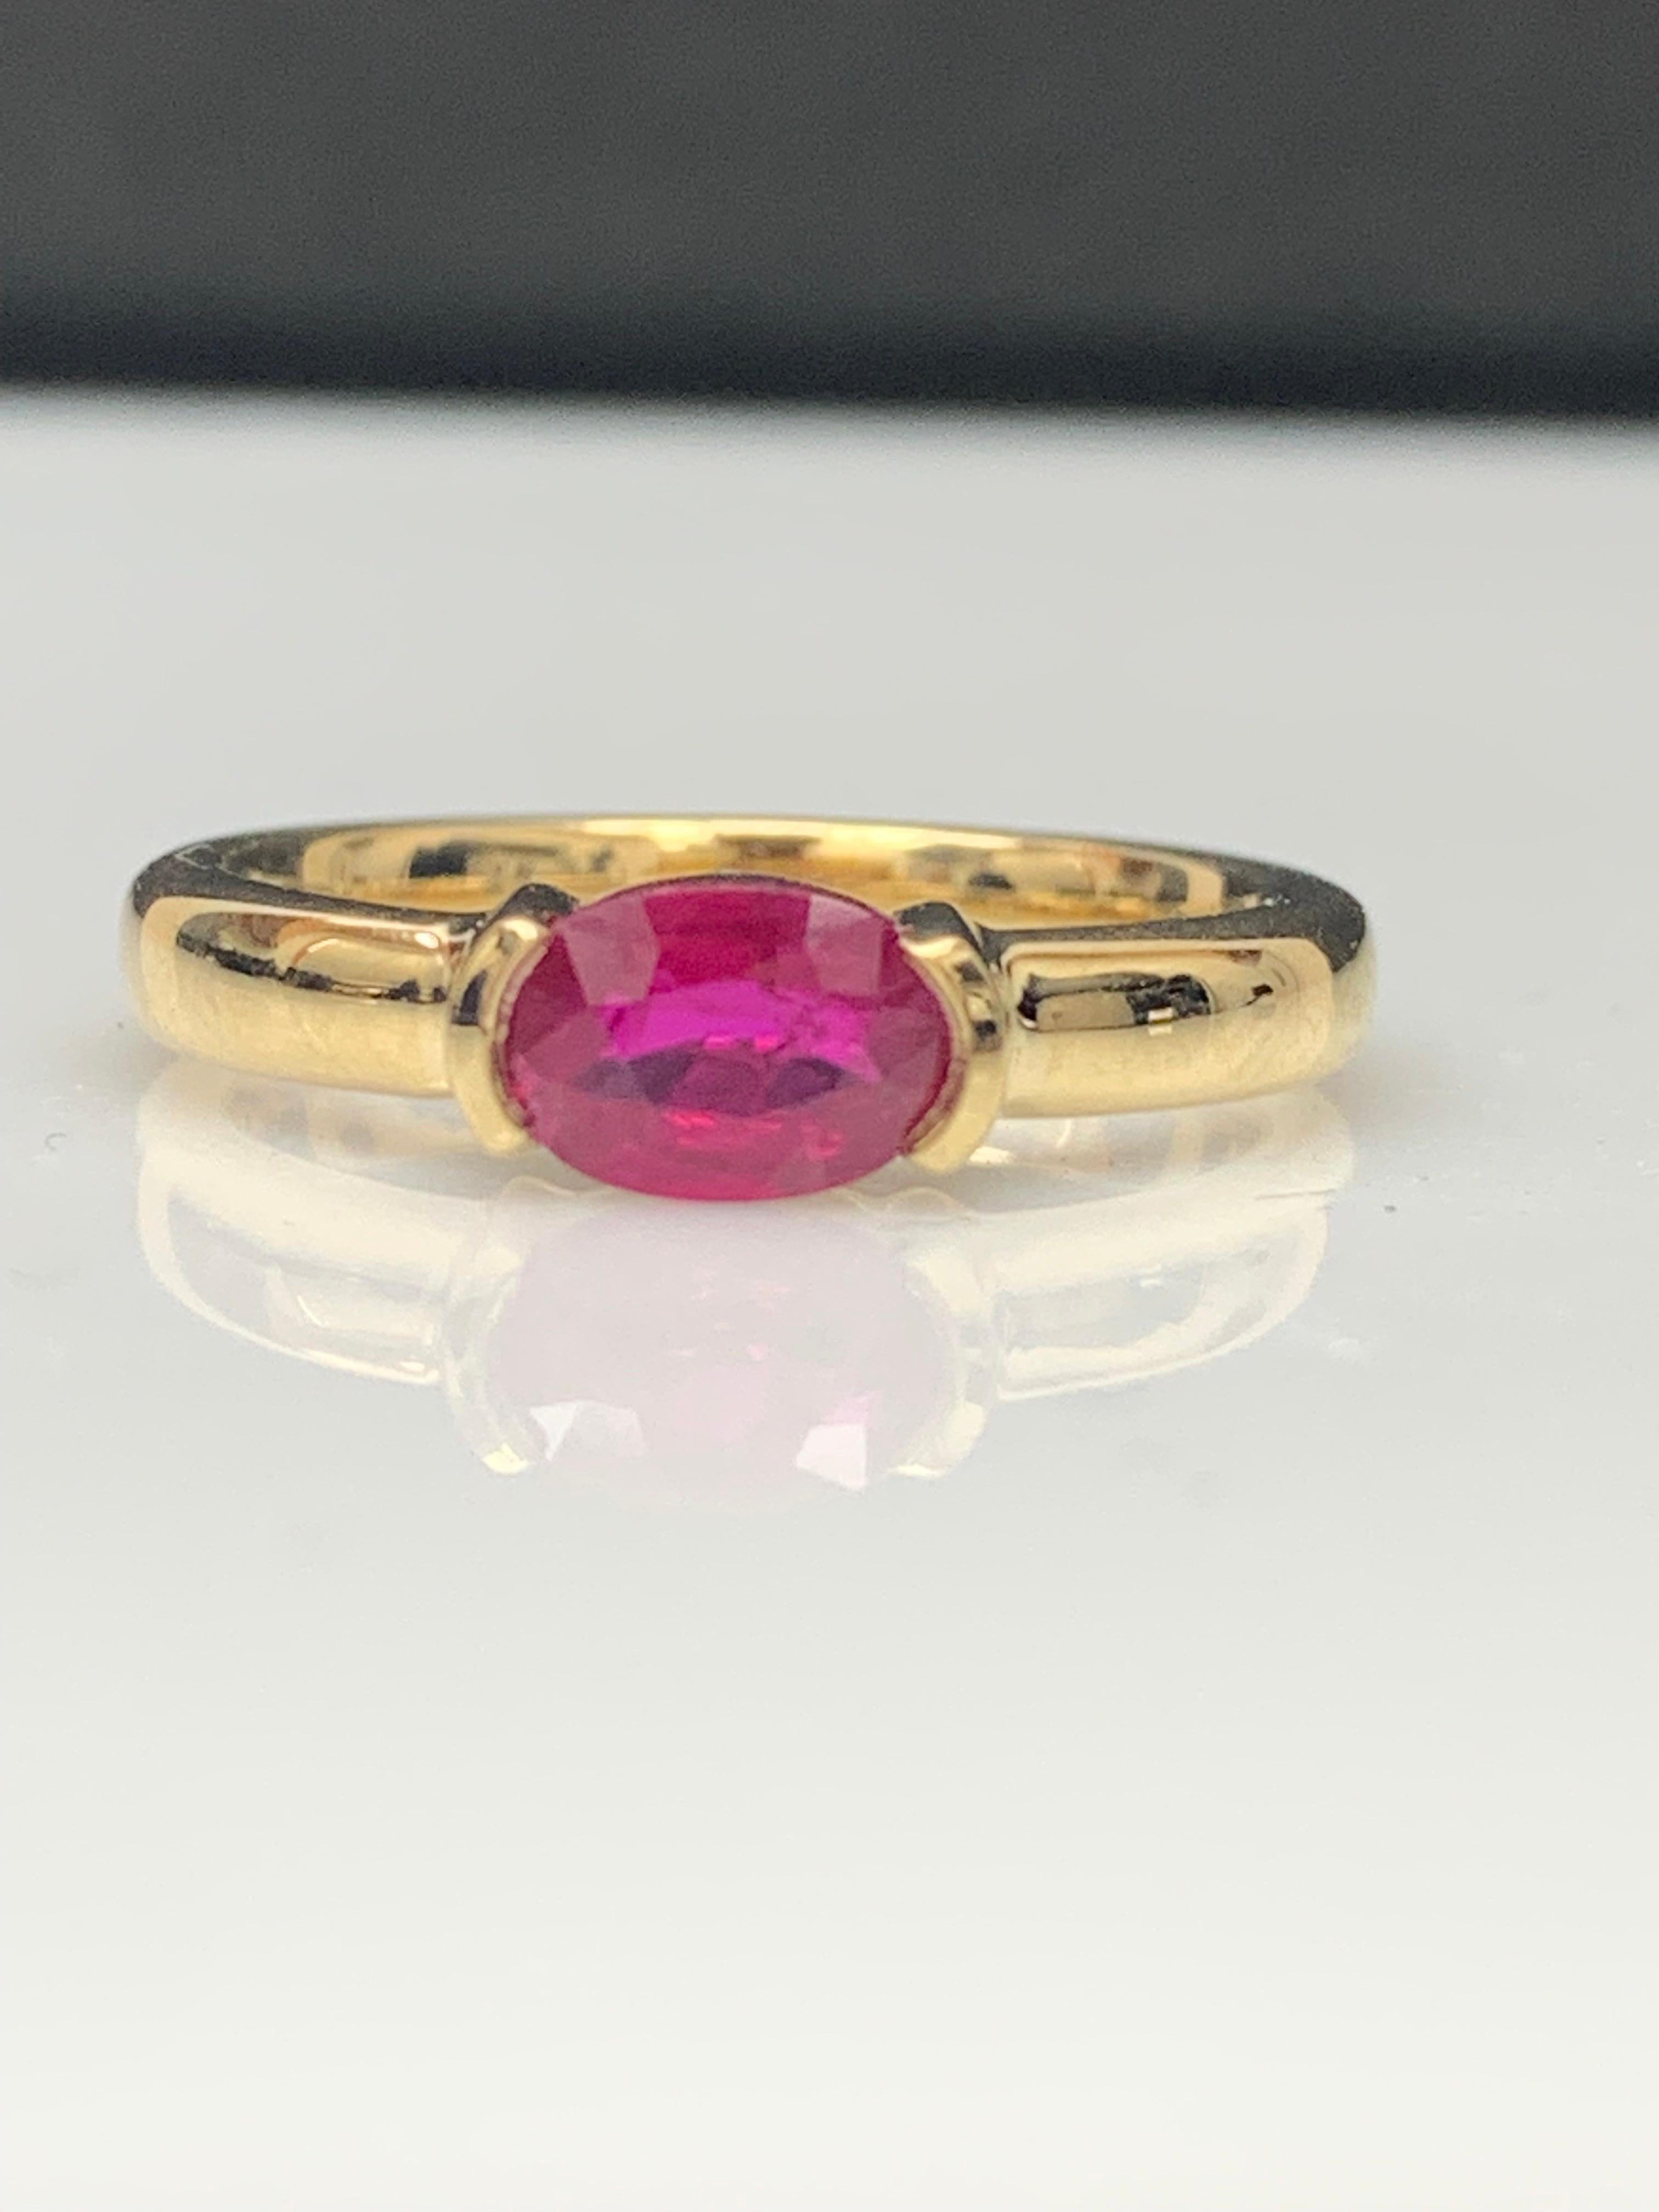 0.78 Carat Oval Cut Ruby Band Ring in 14K Yellow Gold For Sale 5